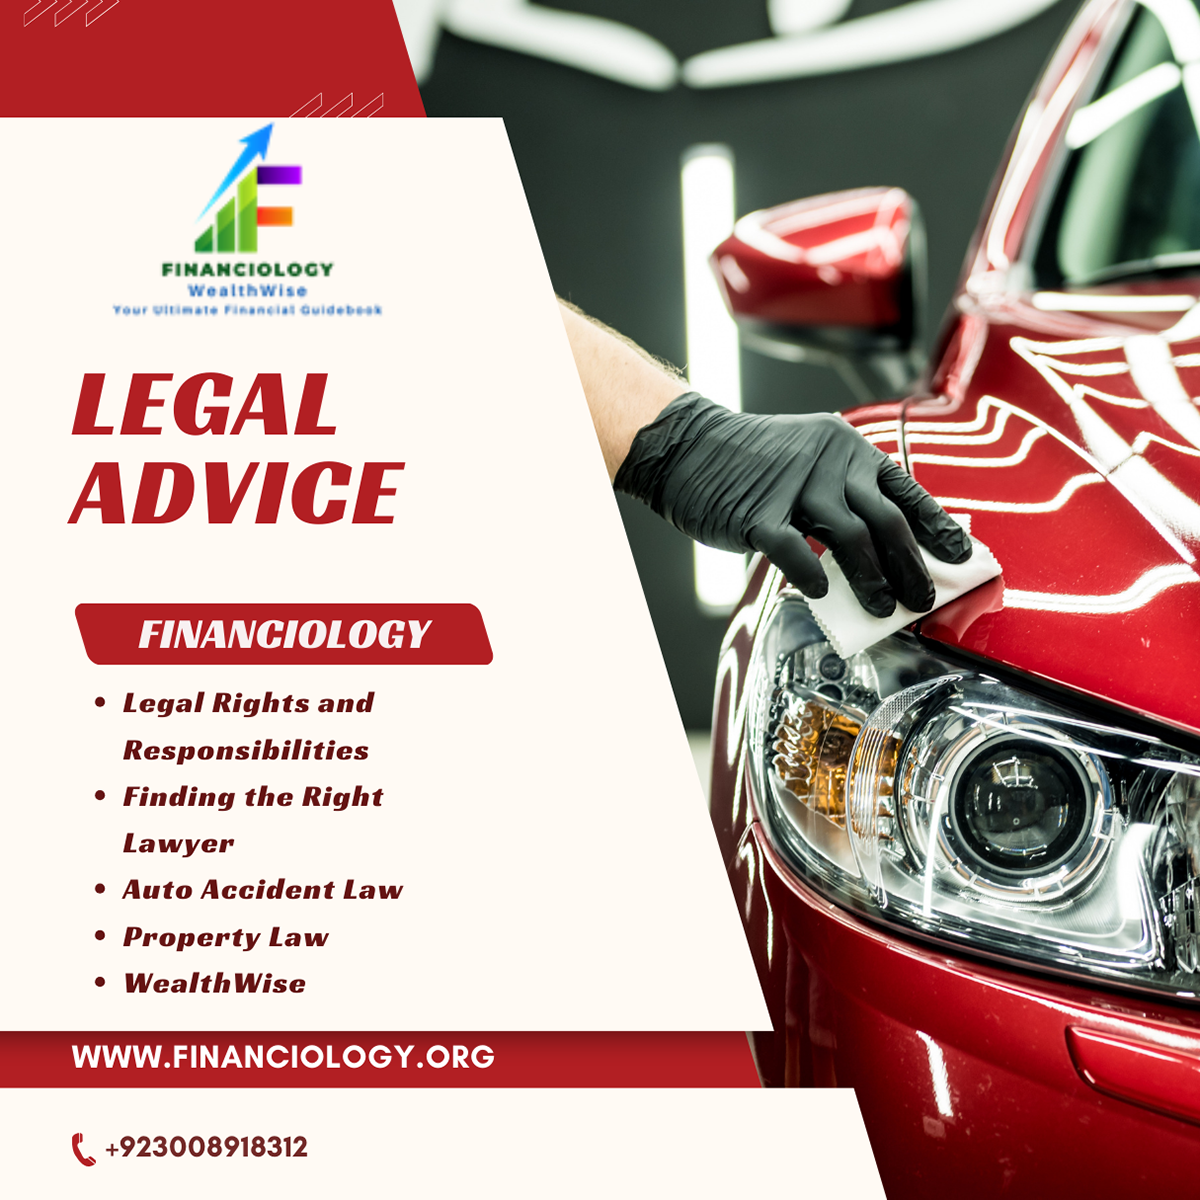 Financial Services financiology wealthwise legal advice legal rights